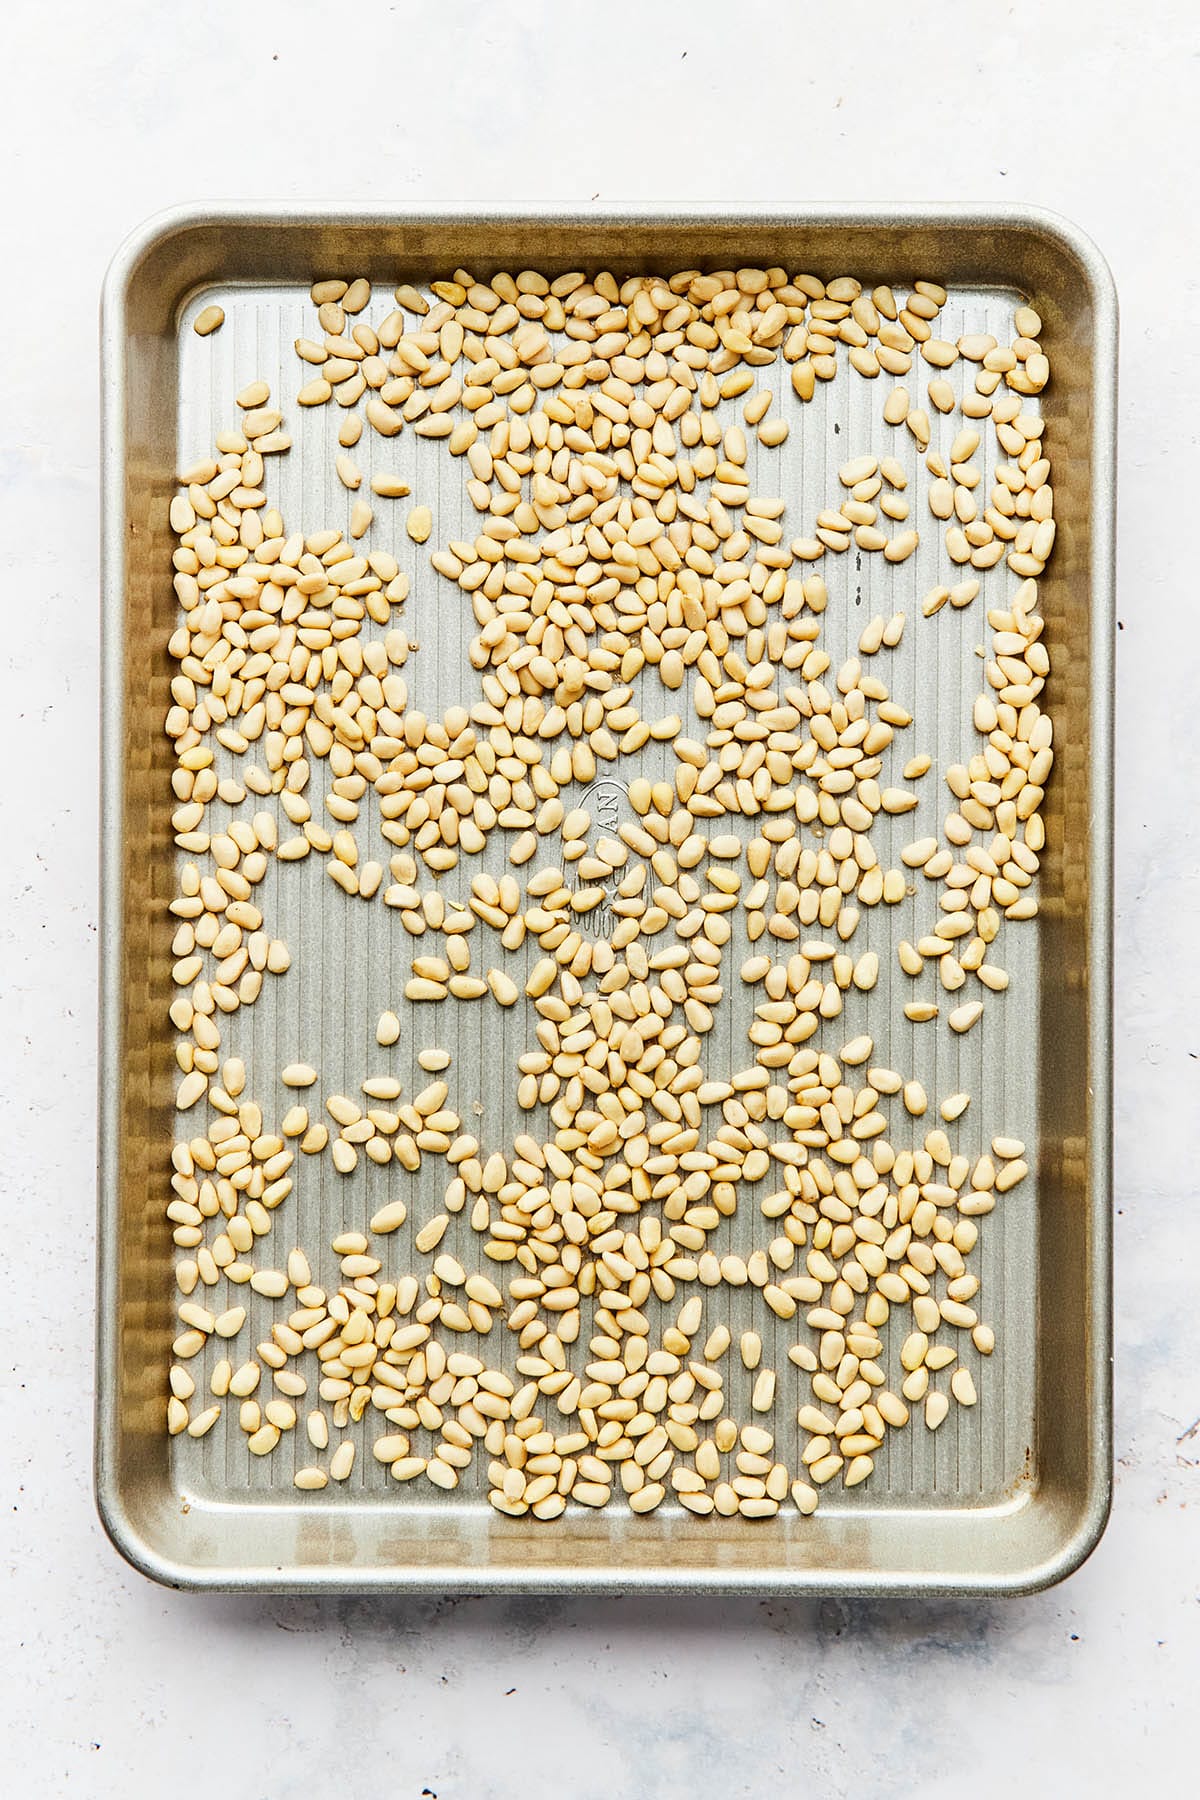 A tray of raw pine nuts.